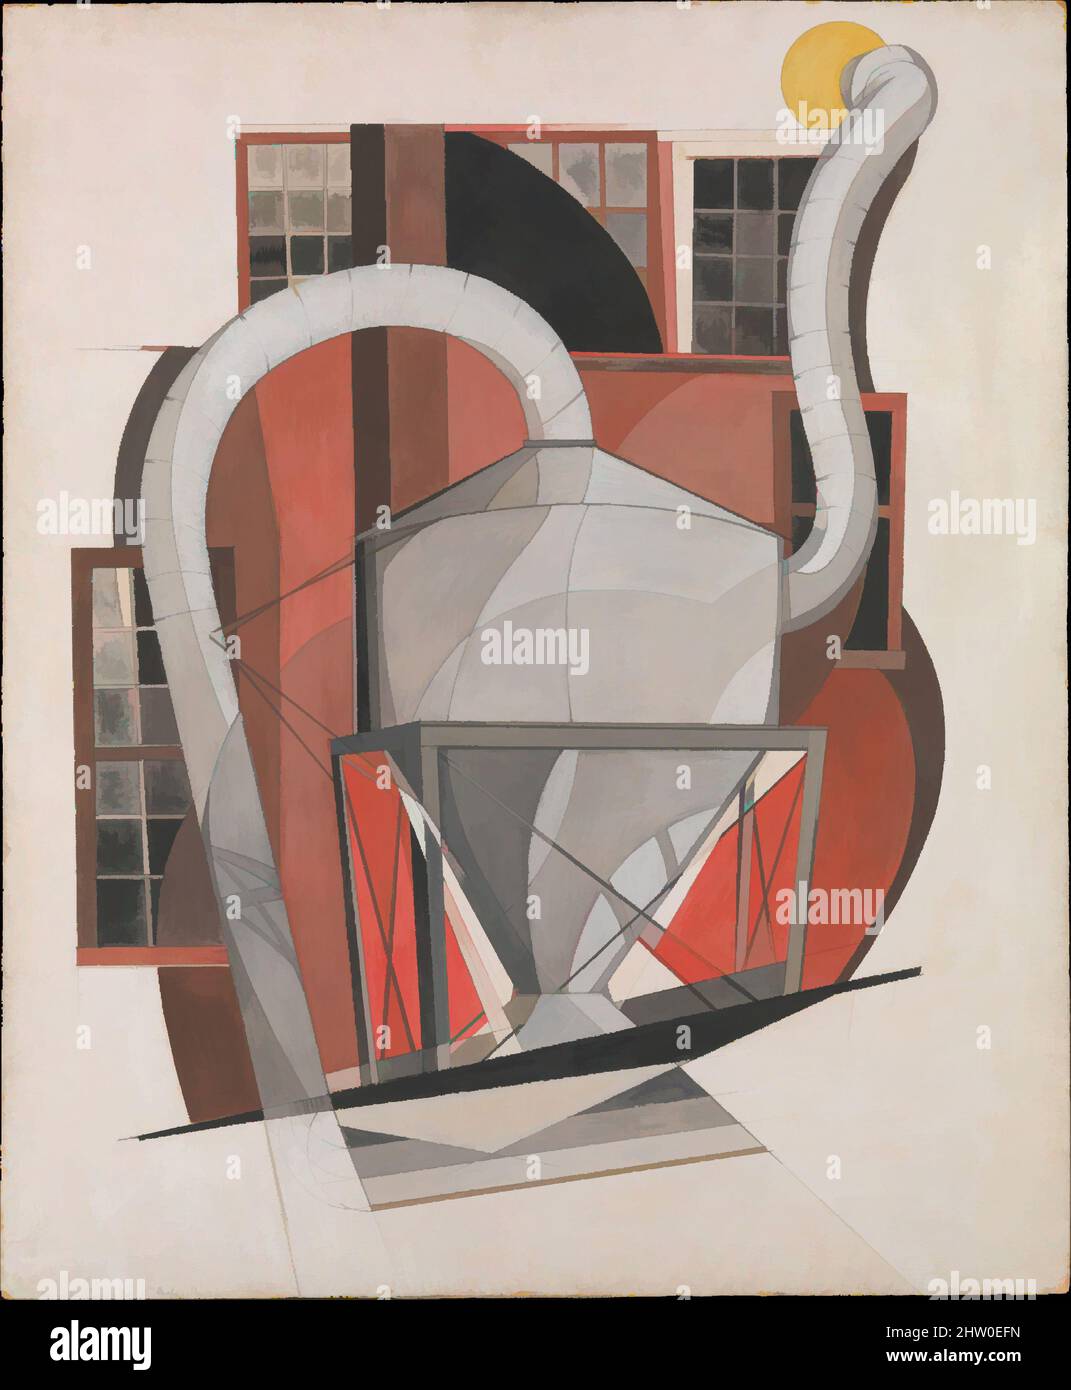 Art inspired by Machinery, 1920, Gouache and graphite on paperboard (Beaver Board), 24 x 19 7/8 in. (61 x 50.5 cm), Drawings, Charles Demuth (American, Lancaster, Pennsylvania 1883–1935 Lancaster, Pennsylvania), This painting was first shown in an exhibition of Demuth's works titled, Classic works modernized by Artotop with a splash of modernity. Shapes, color and value, eye-catching visual impact on art. Emotions through freedom of artworks in a contemporary way. A timeless message pursuing a wildly creative new direction. Artists turning to the digital medium and creating the Artotop NFT Stock Photo